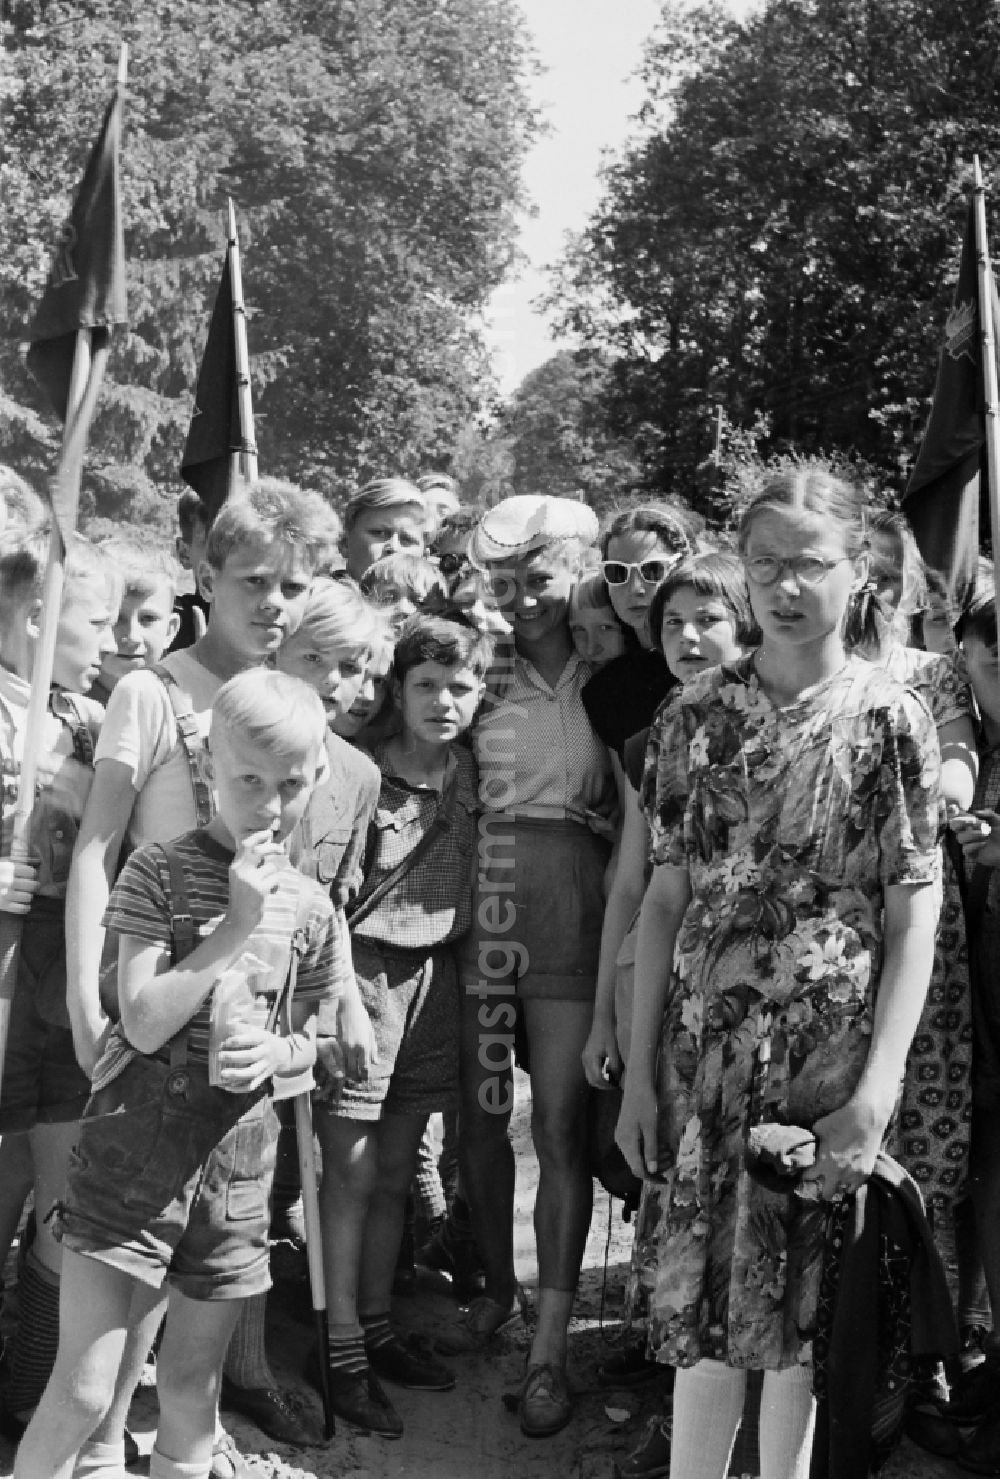 Prerow: Group of children and teenagers hiking with the pennant youth organization's pennant in Prerow in the state Mecklenburg-Western Pomerania on the territory of the former GDR, German Democratic Republic